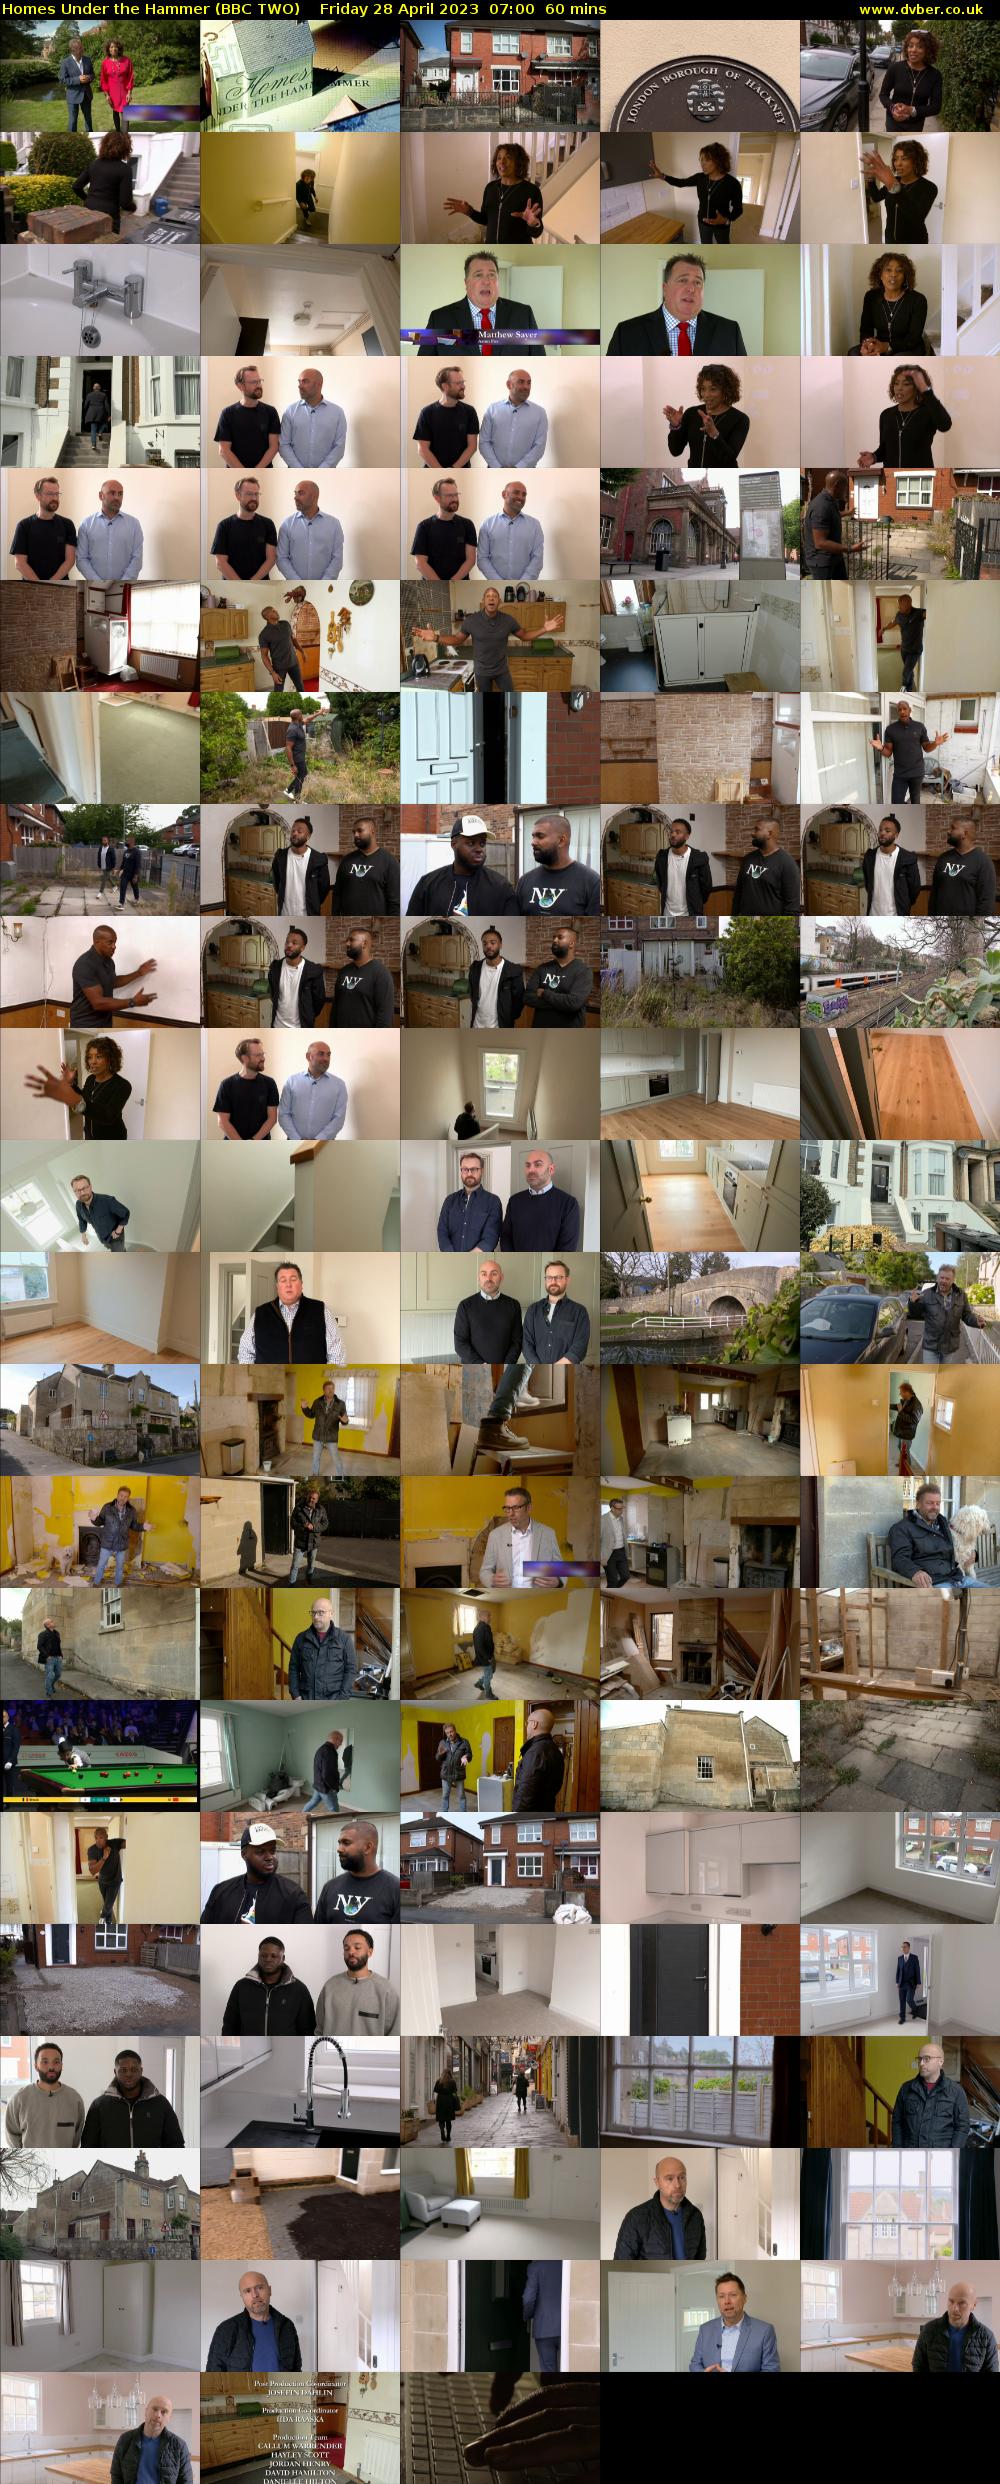 Homes Under the Hammer (BBC TWO) Friday 28 April 2023 07:00 - 08:00